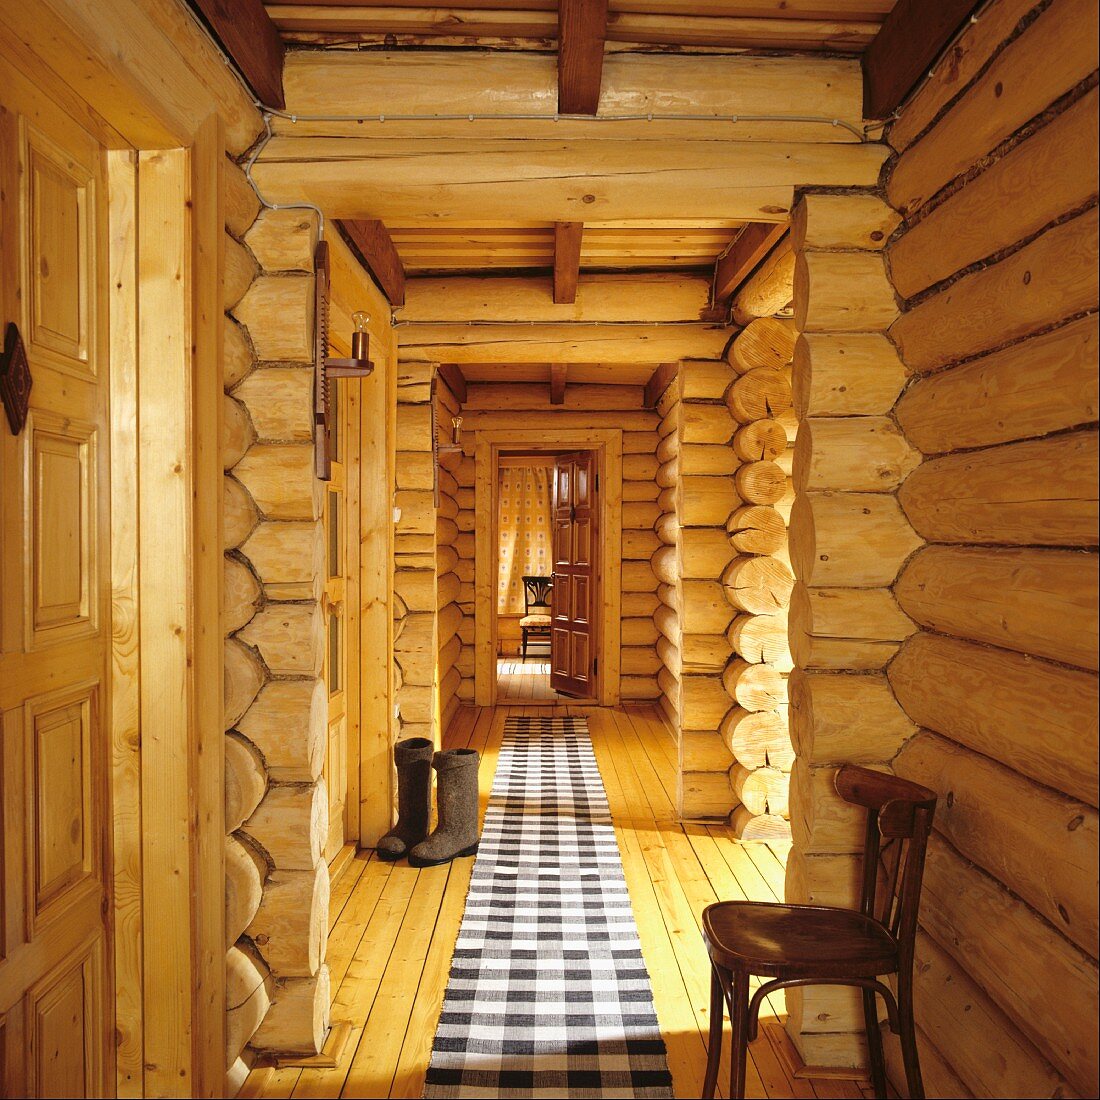 Corridor with black and white checked runner on floor in log cabin